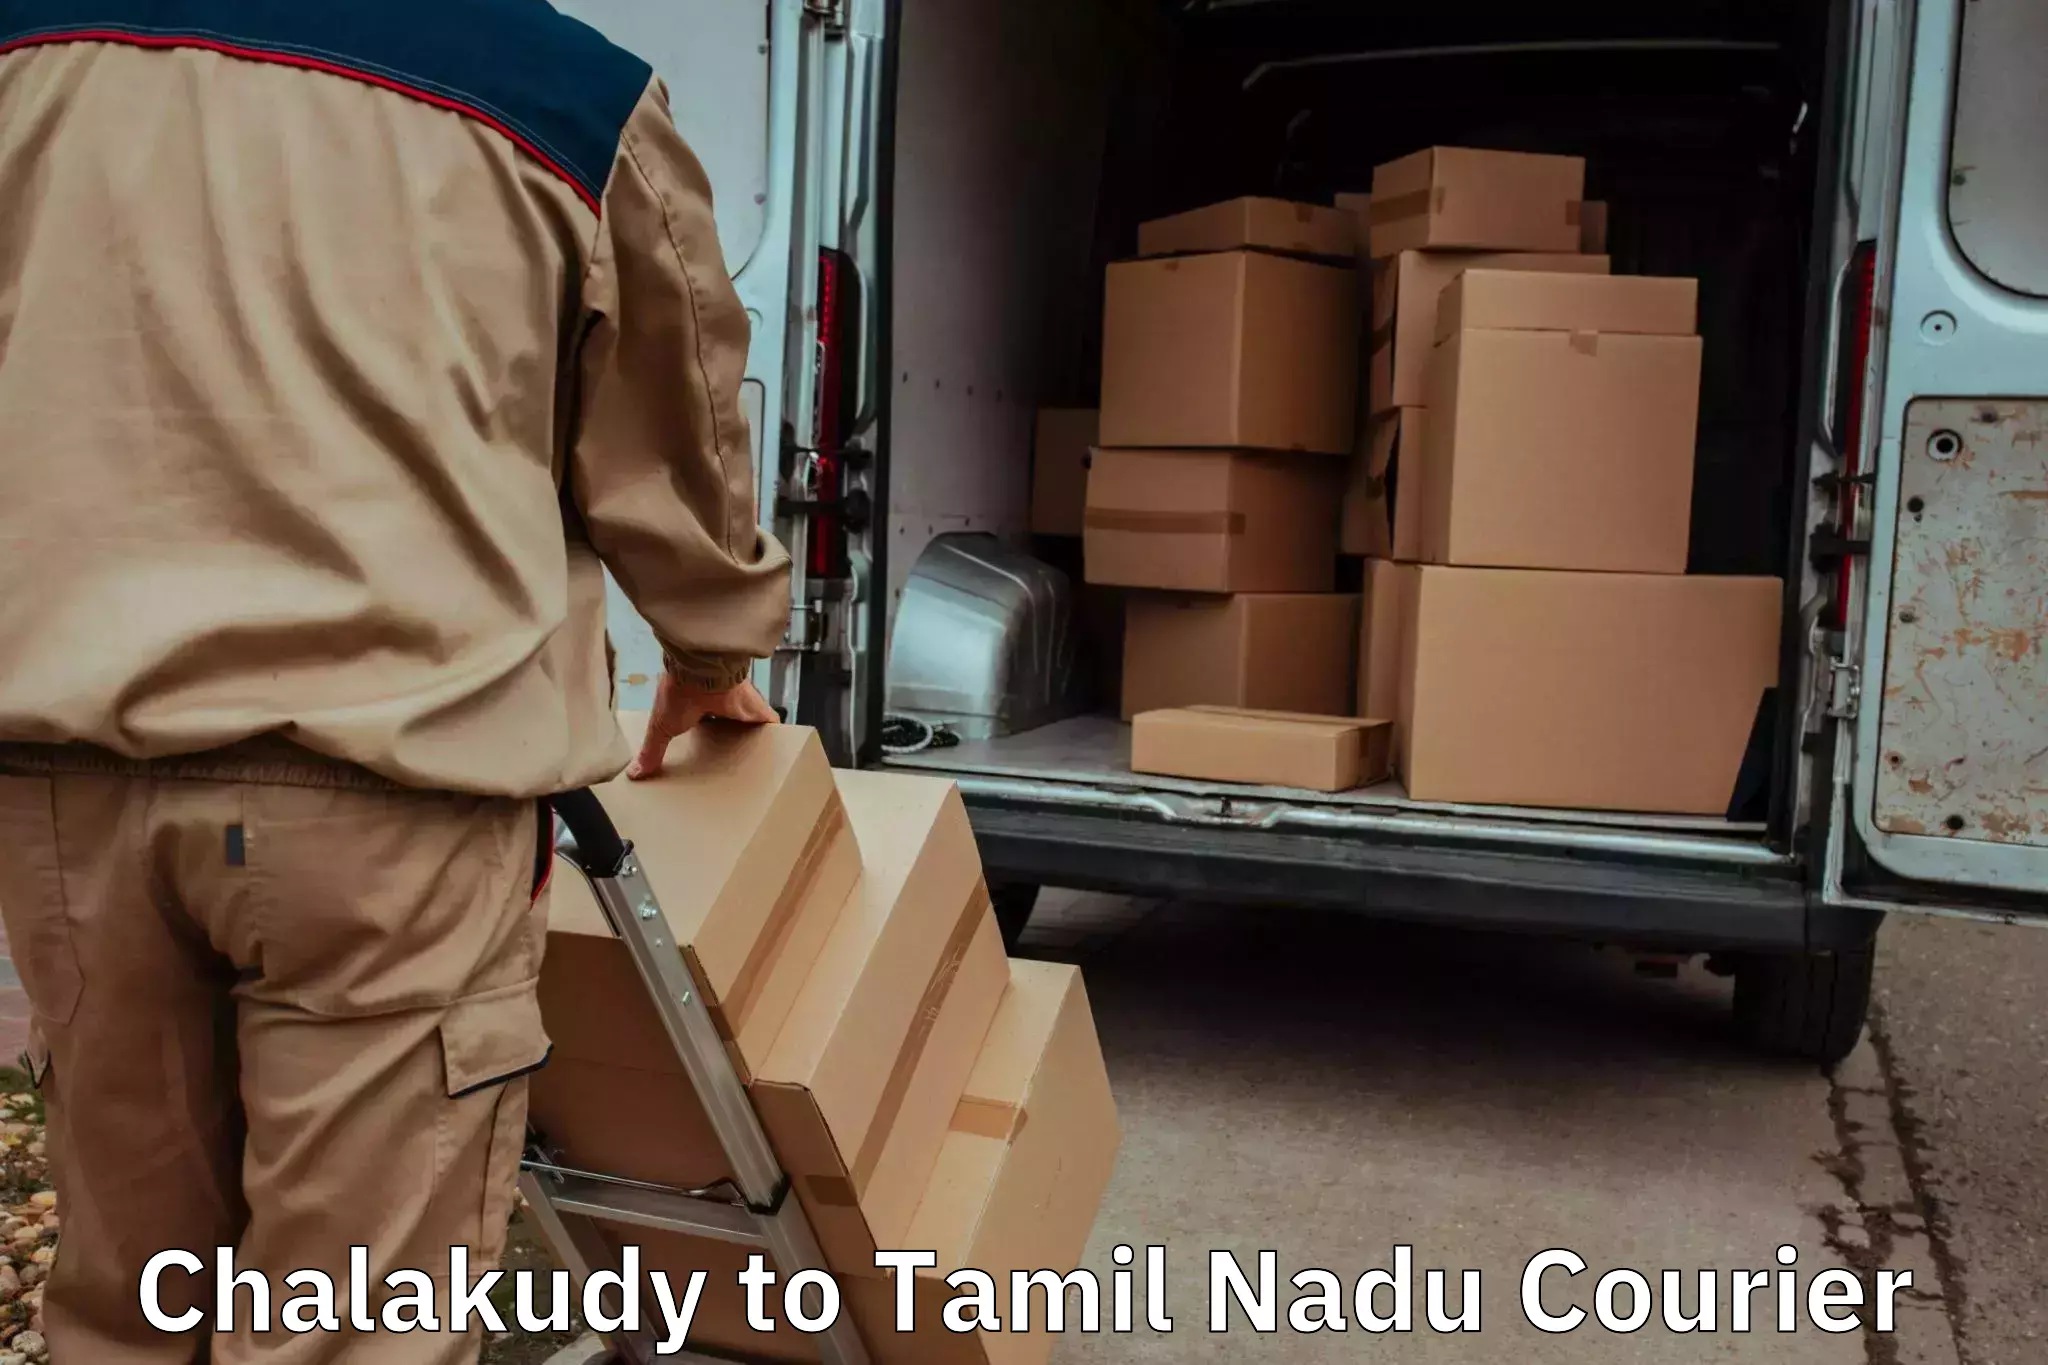 Furniture moving specialists Chalakudy to Tirupur